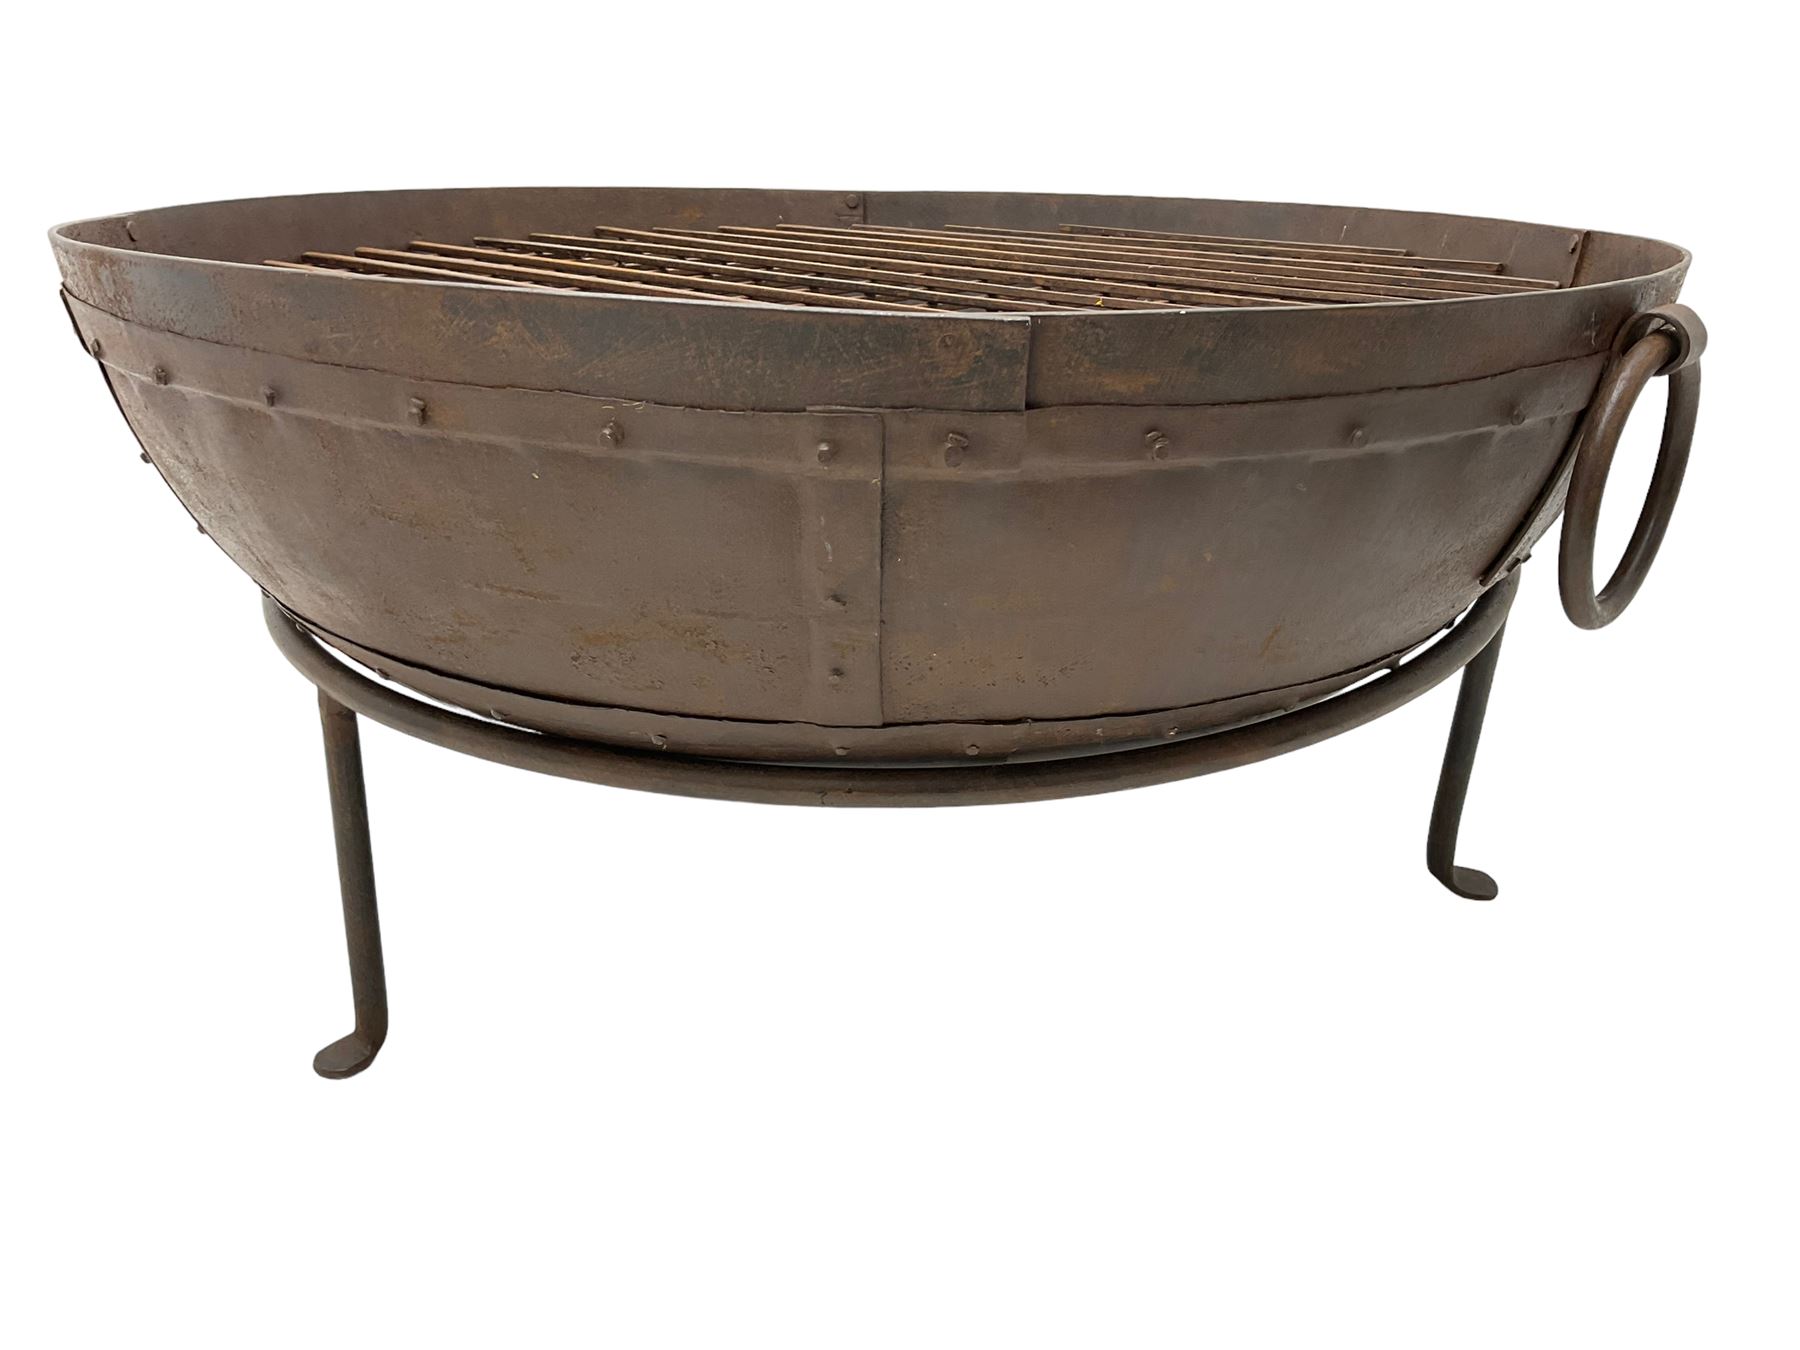 Circular riveted iron fire pit